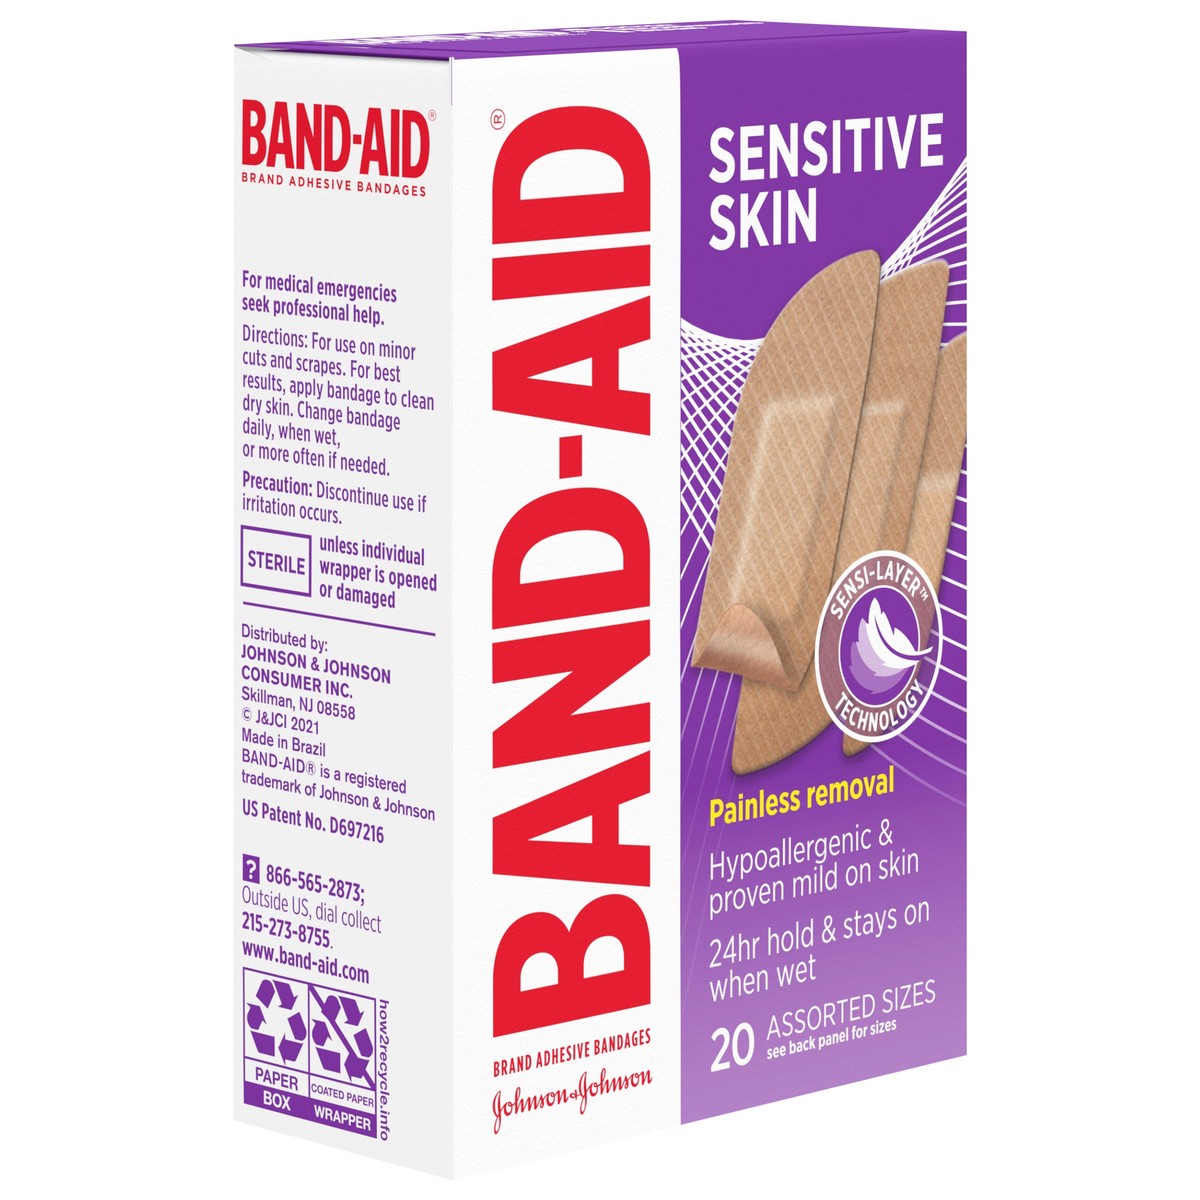 slide 4 of 8, BAND-AID Adhesive Bandages for Sensitive Skin, Hypoallergenic Bandages with Painless Removal, Stays on When Wet and Suitable for Eczema Prone Skin, Sterile, Assorted Sizes, 20 ct, 20 ct